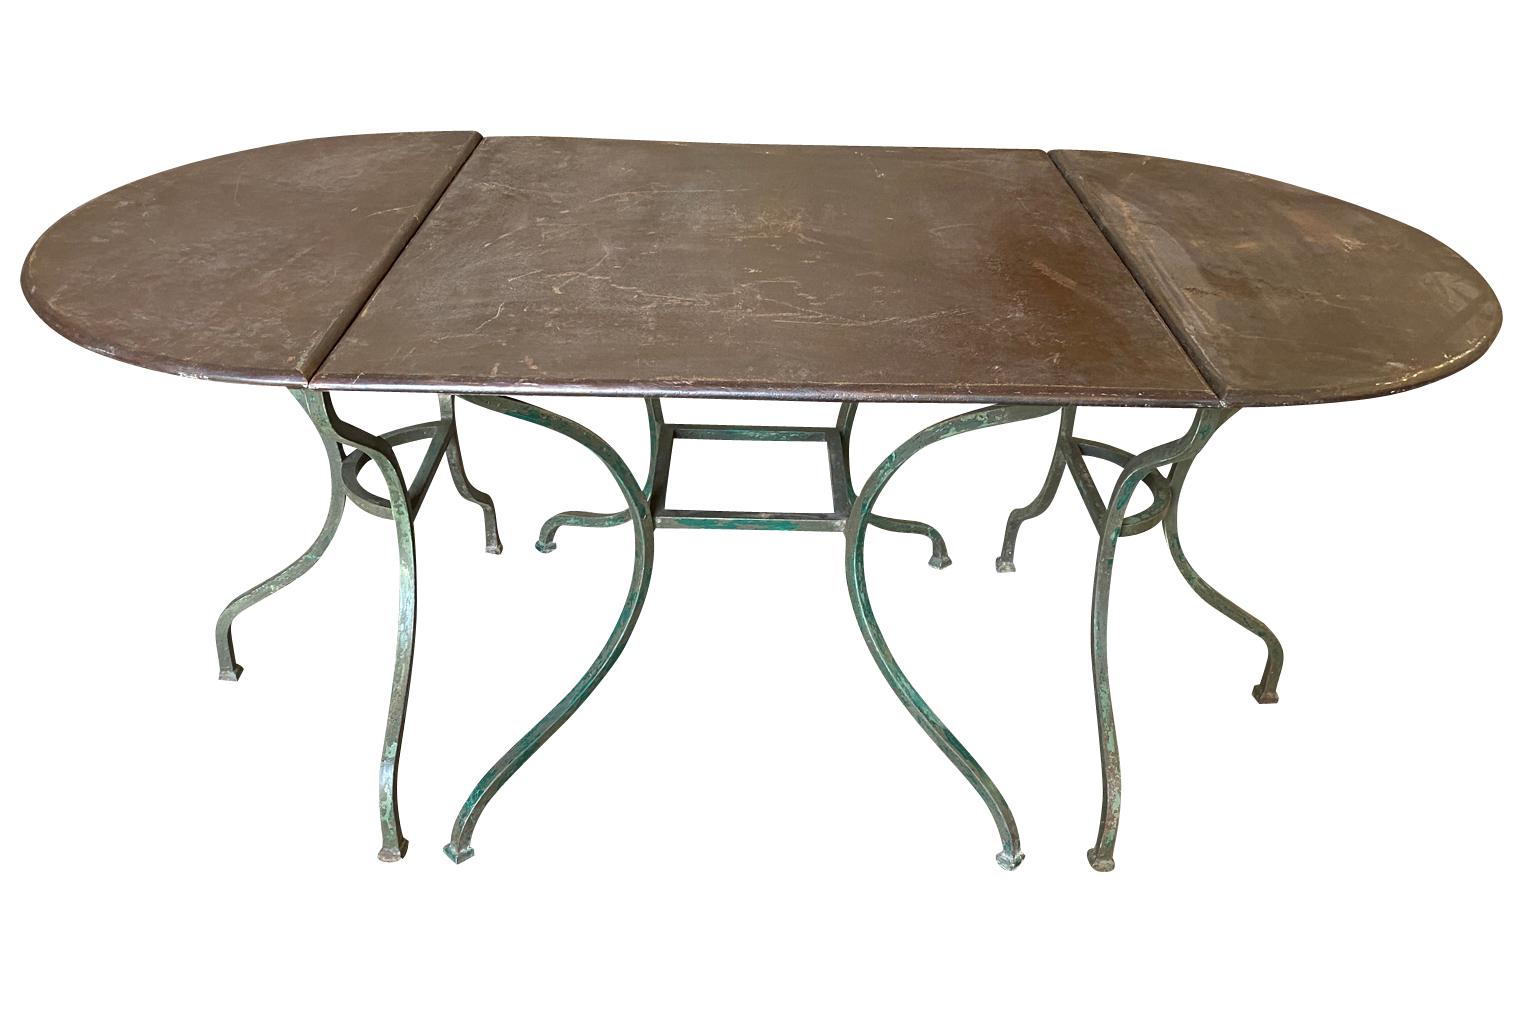 A delightful early 20th century Garden table set from the Provence region of France. Wonderfully presented in 3 sections including the center square table flanked by 2 demi lunes. Use together or separately. Soundly constructed from painted iron -